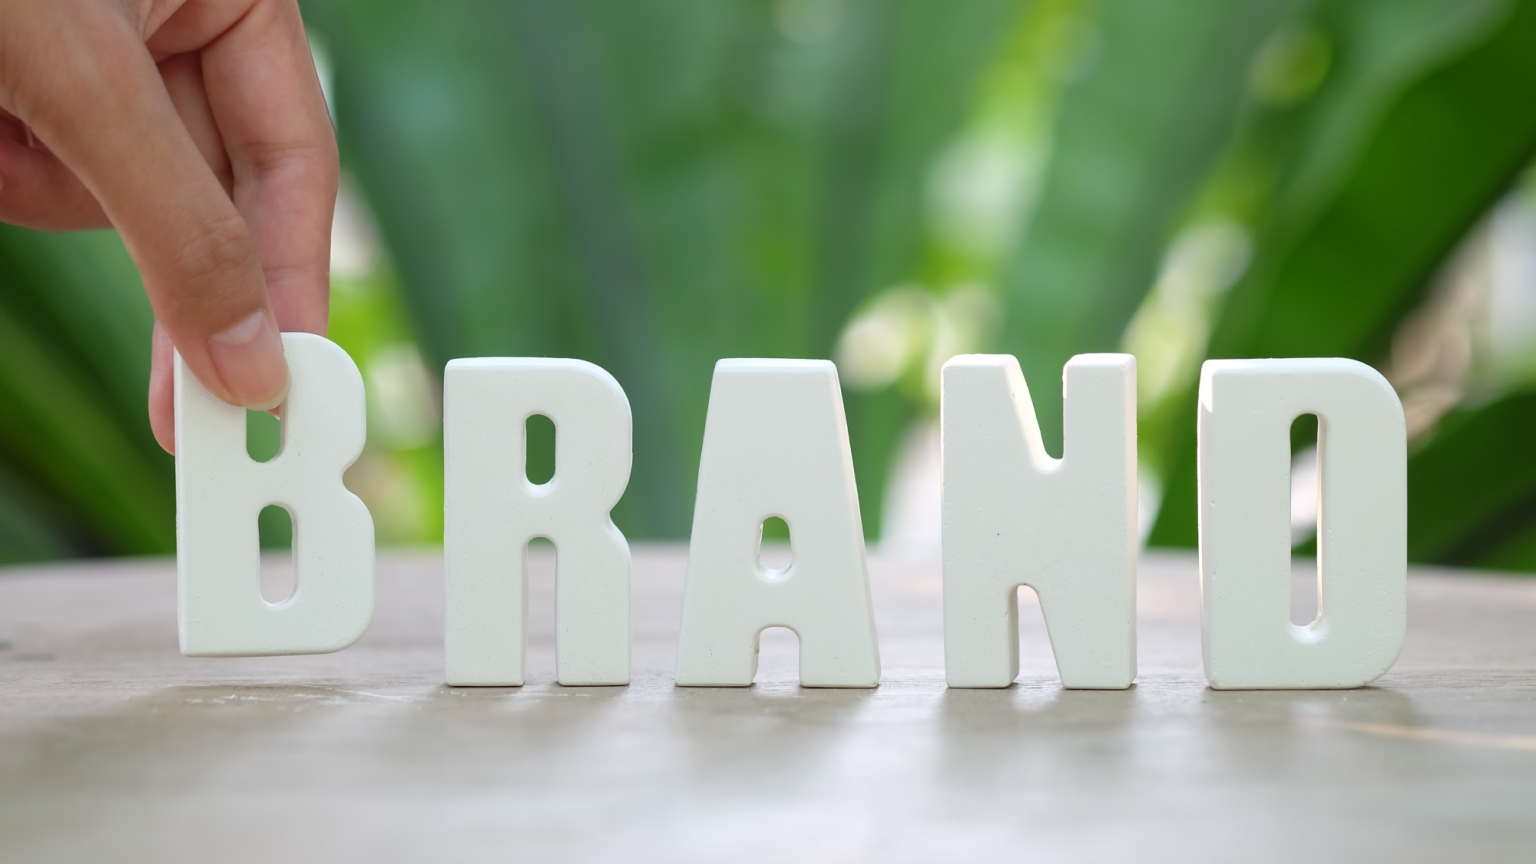 The power of branding: building a strong brand identity